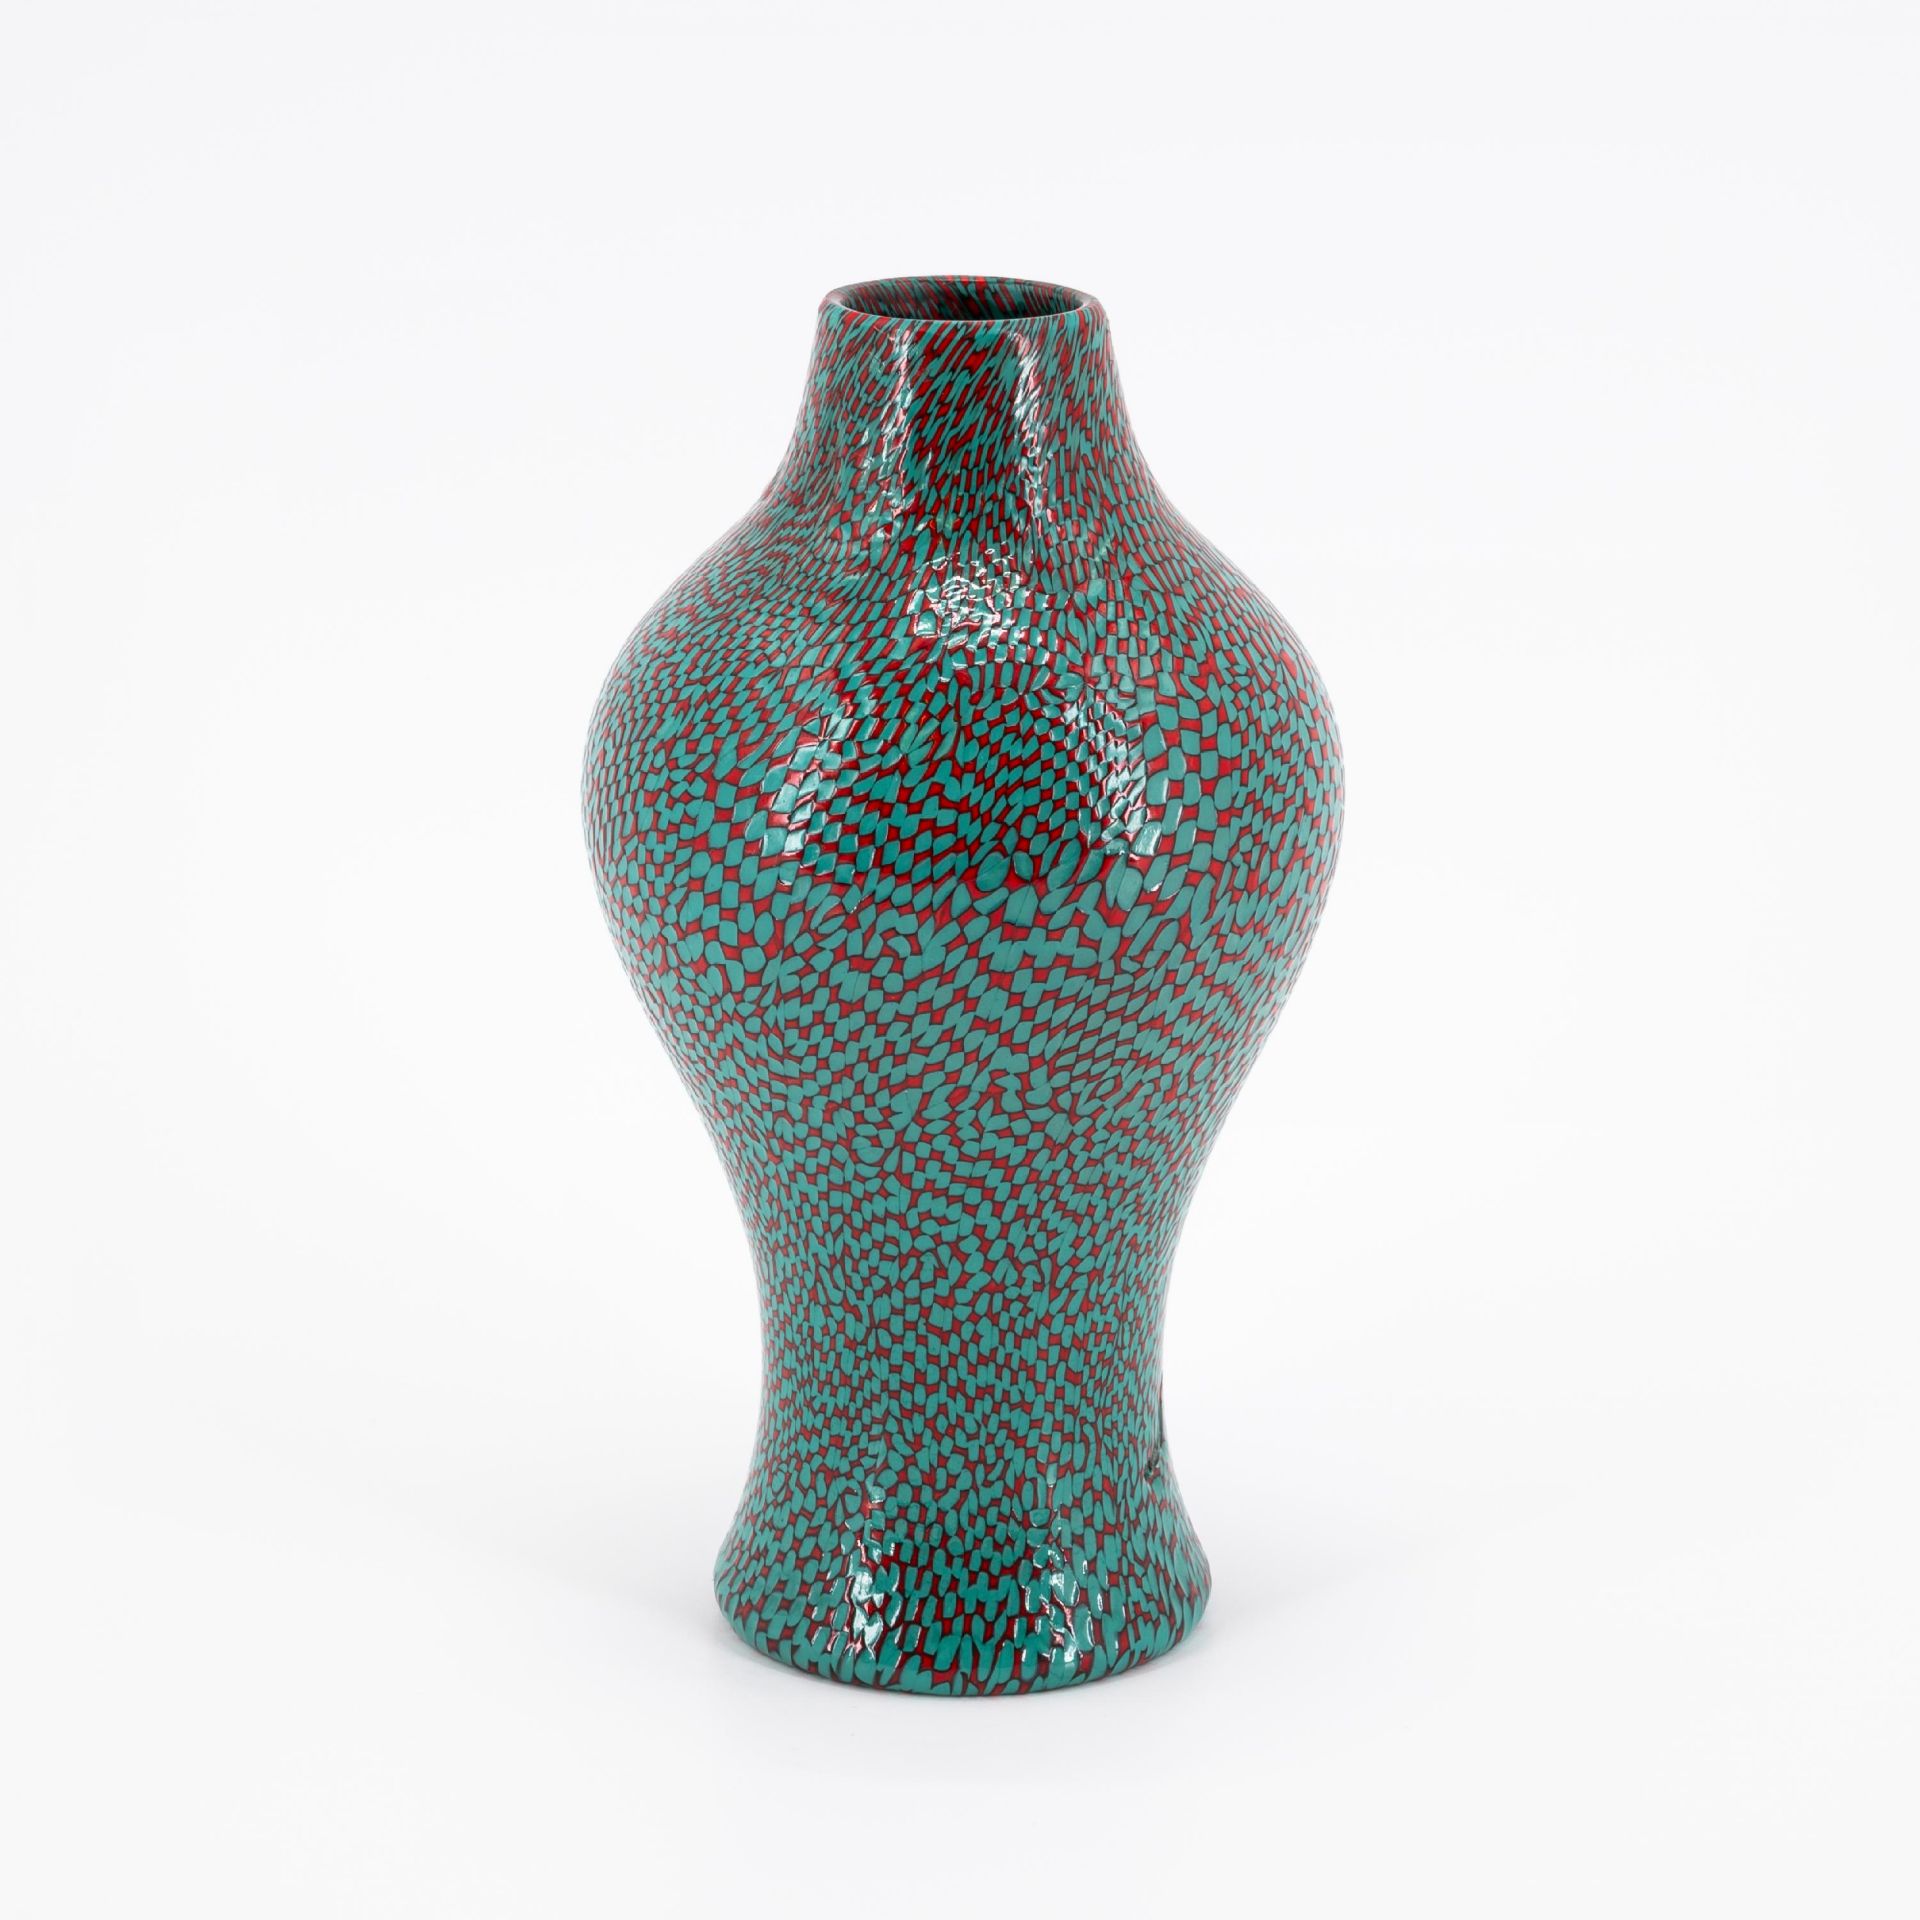 GLASS VASE WITH DeCOR 'A DAMA' - Image 5 of 7